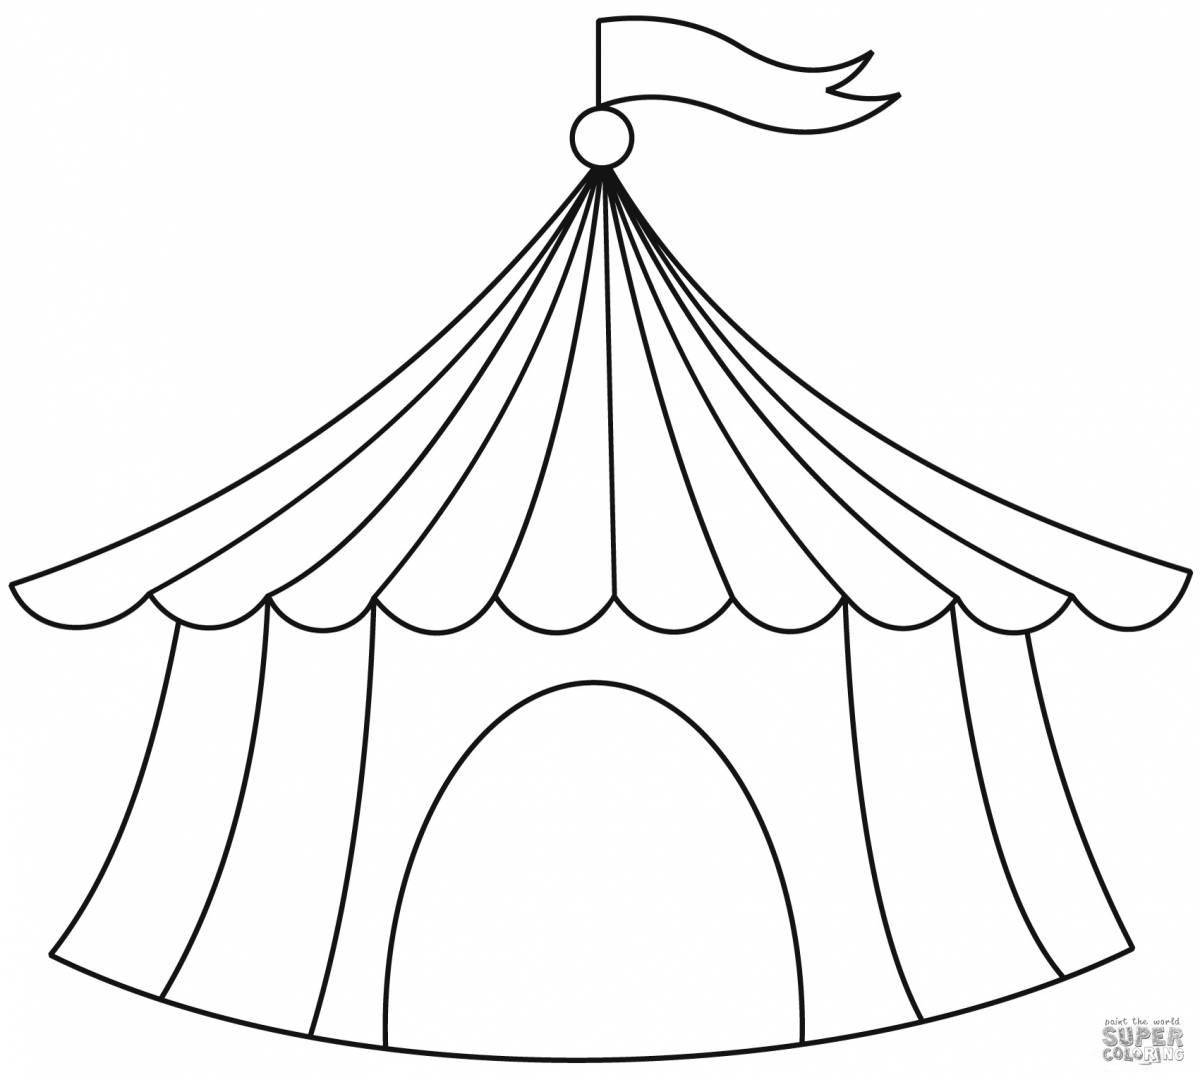 Coloring page dazzling circus tent